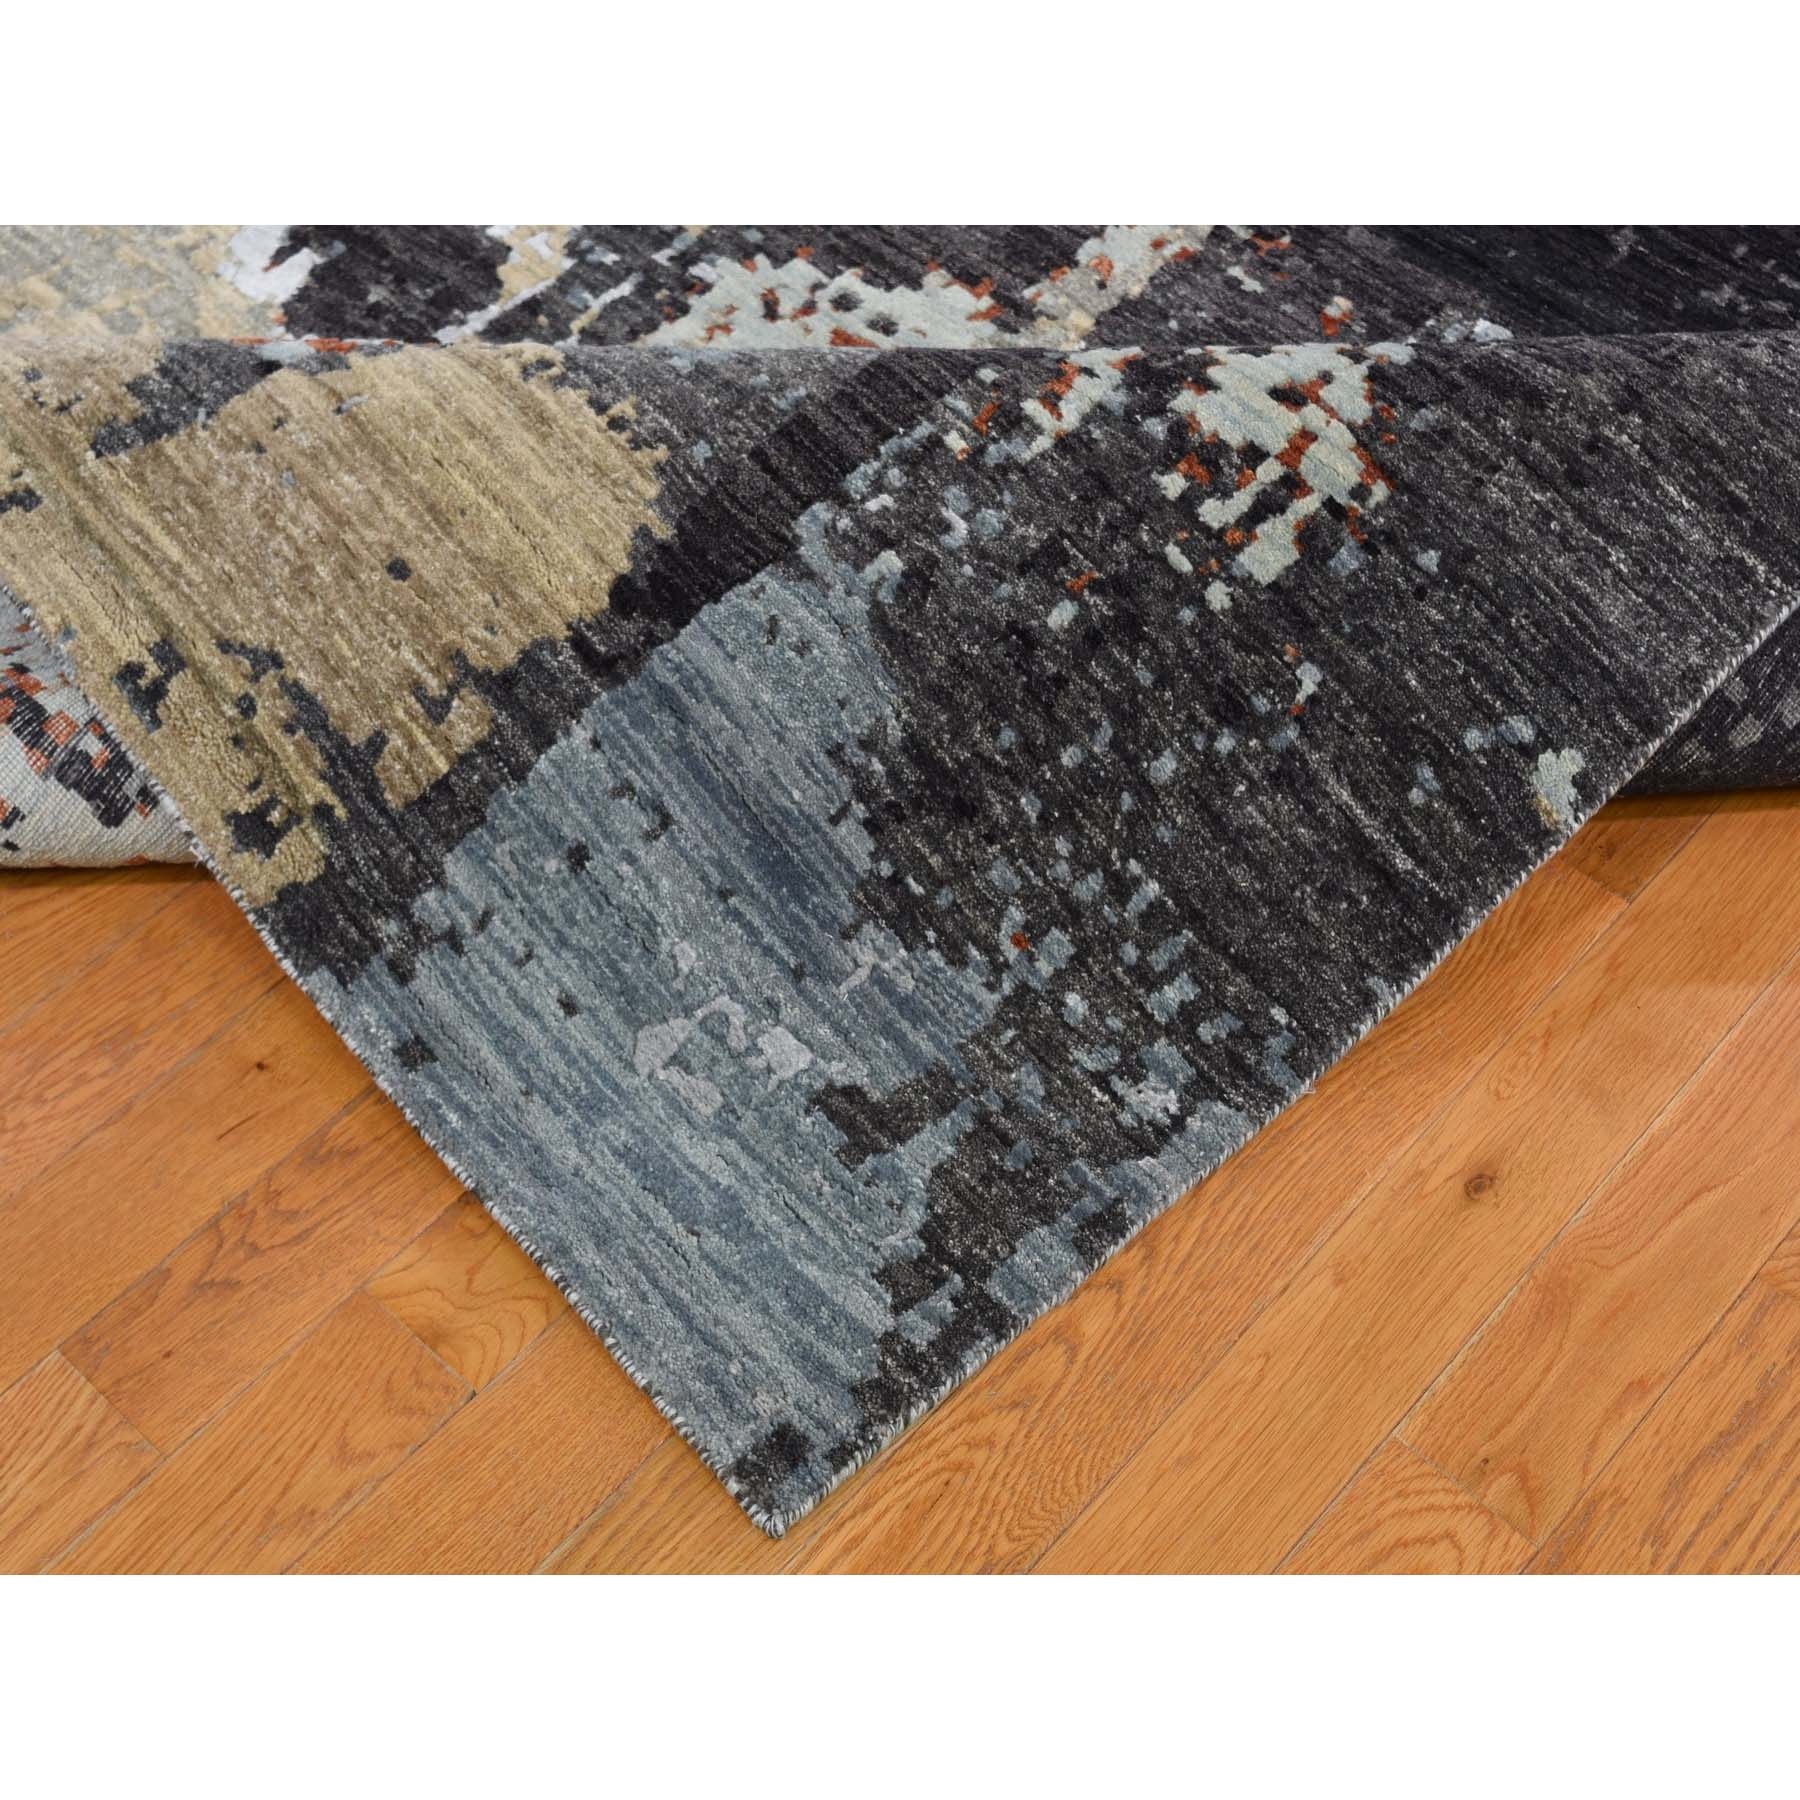 9-x12-1  Black Abstract Design Wool and Silk Hi-Low Pile Persian Knot Hand Knotted Oriental Rug 